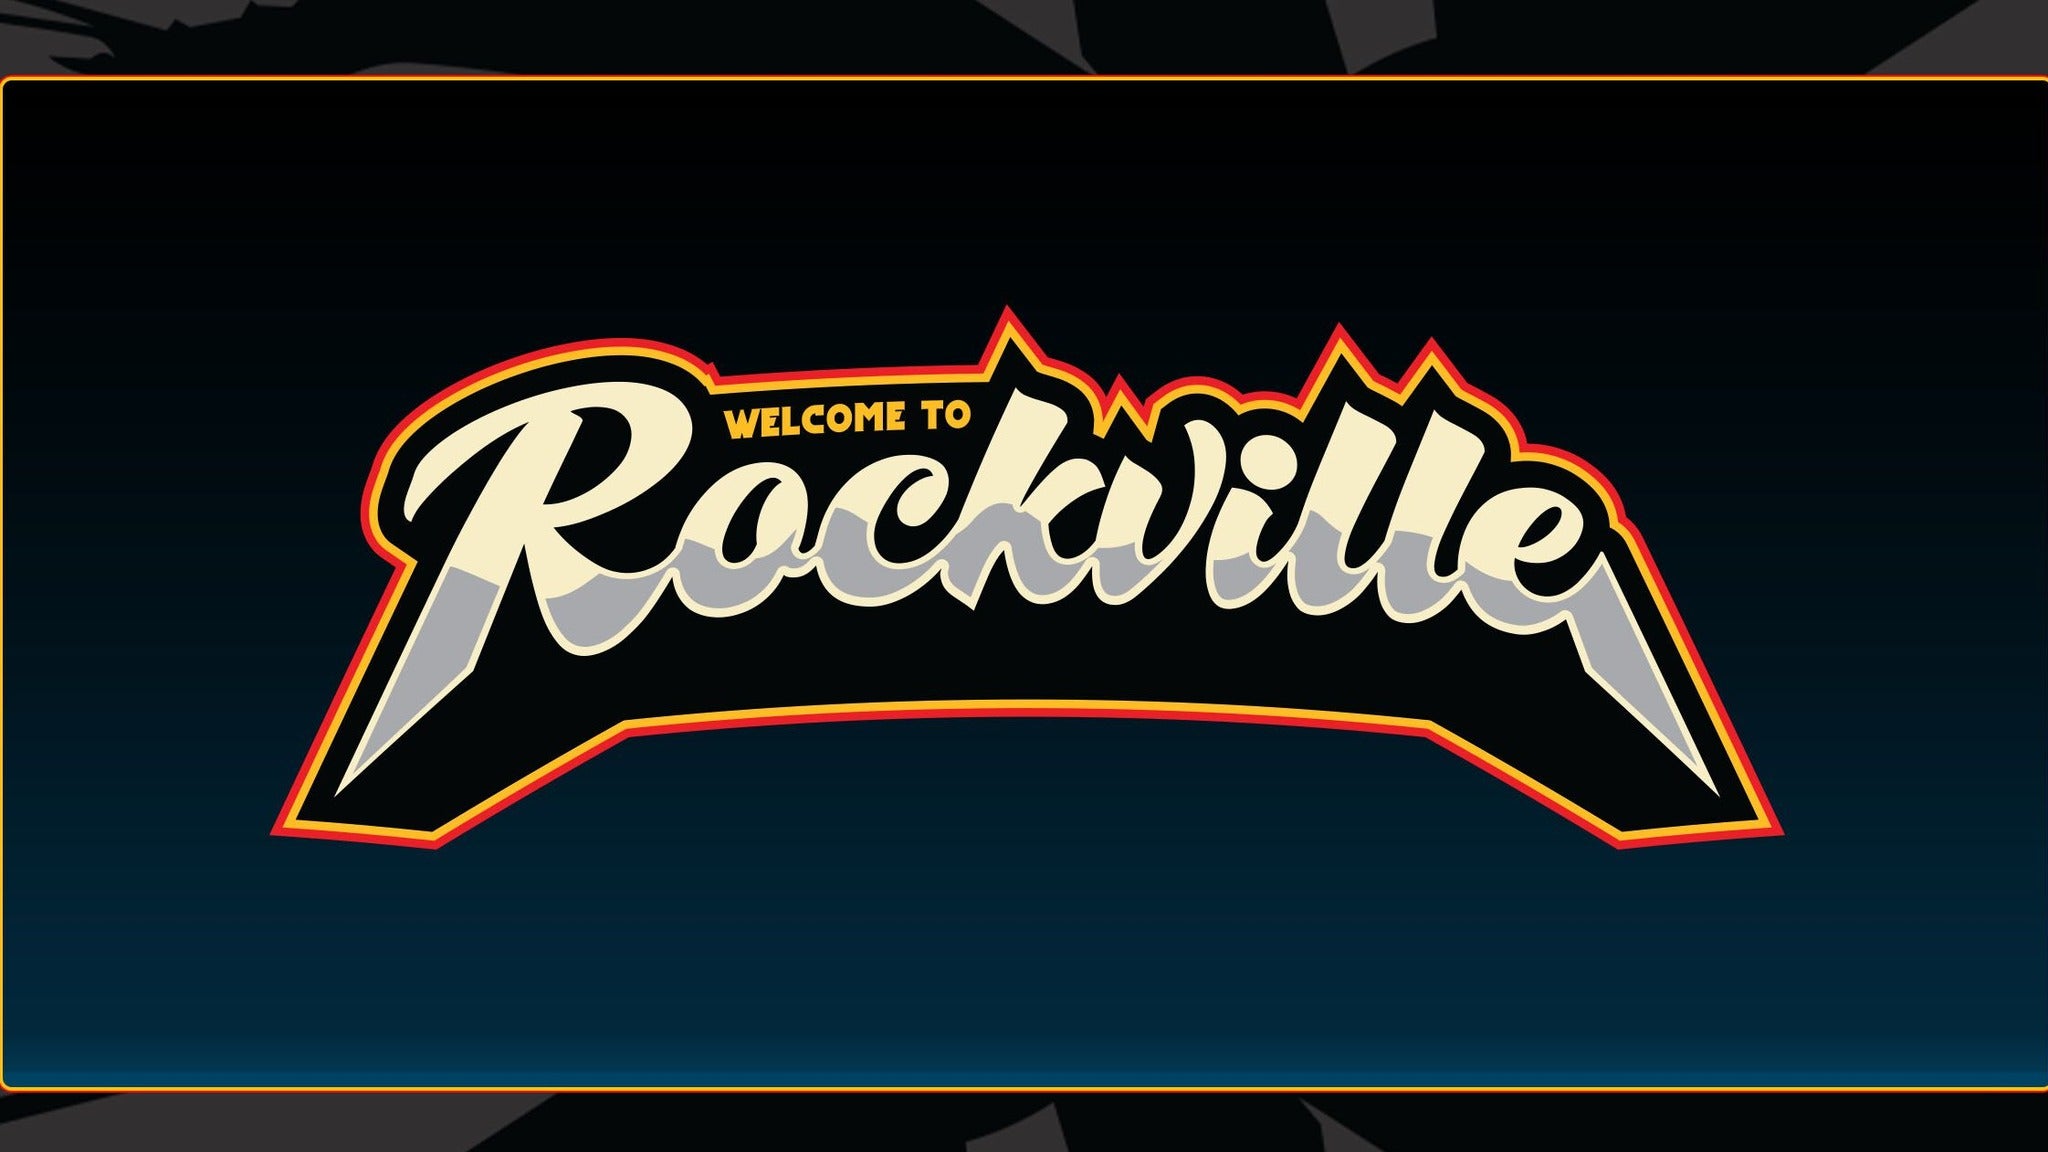 welcome-to-rockville-tickets-2021-concert-tour-dates-ticketmaster